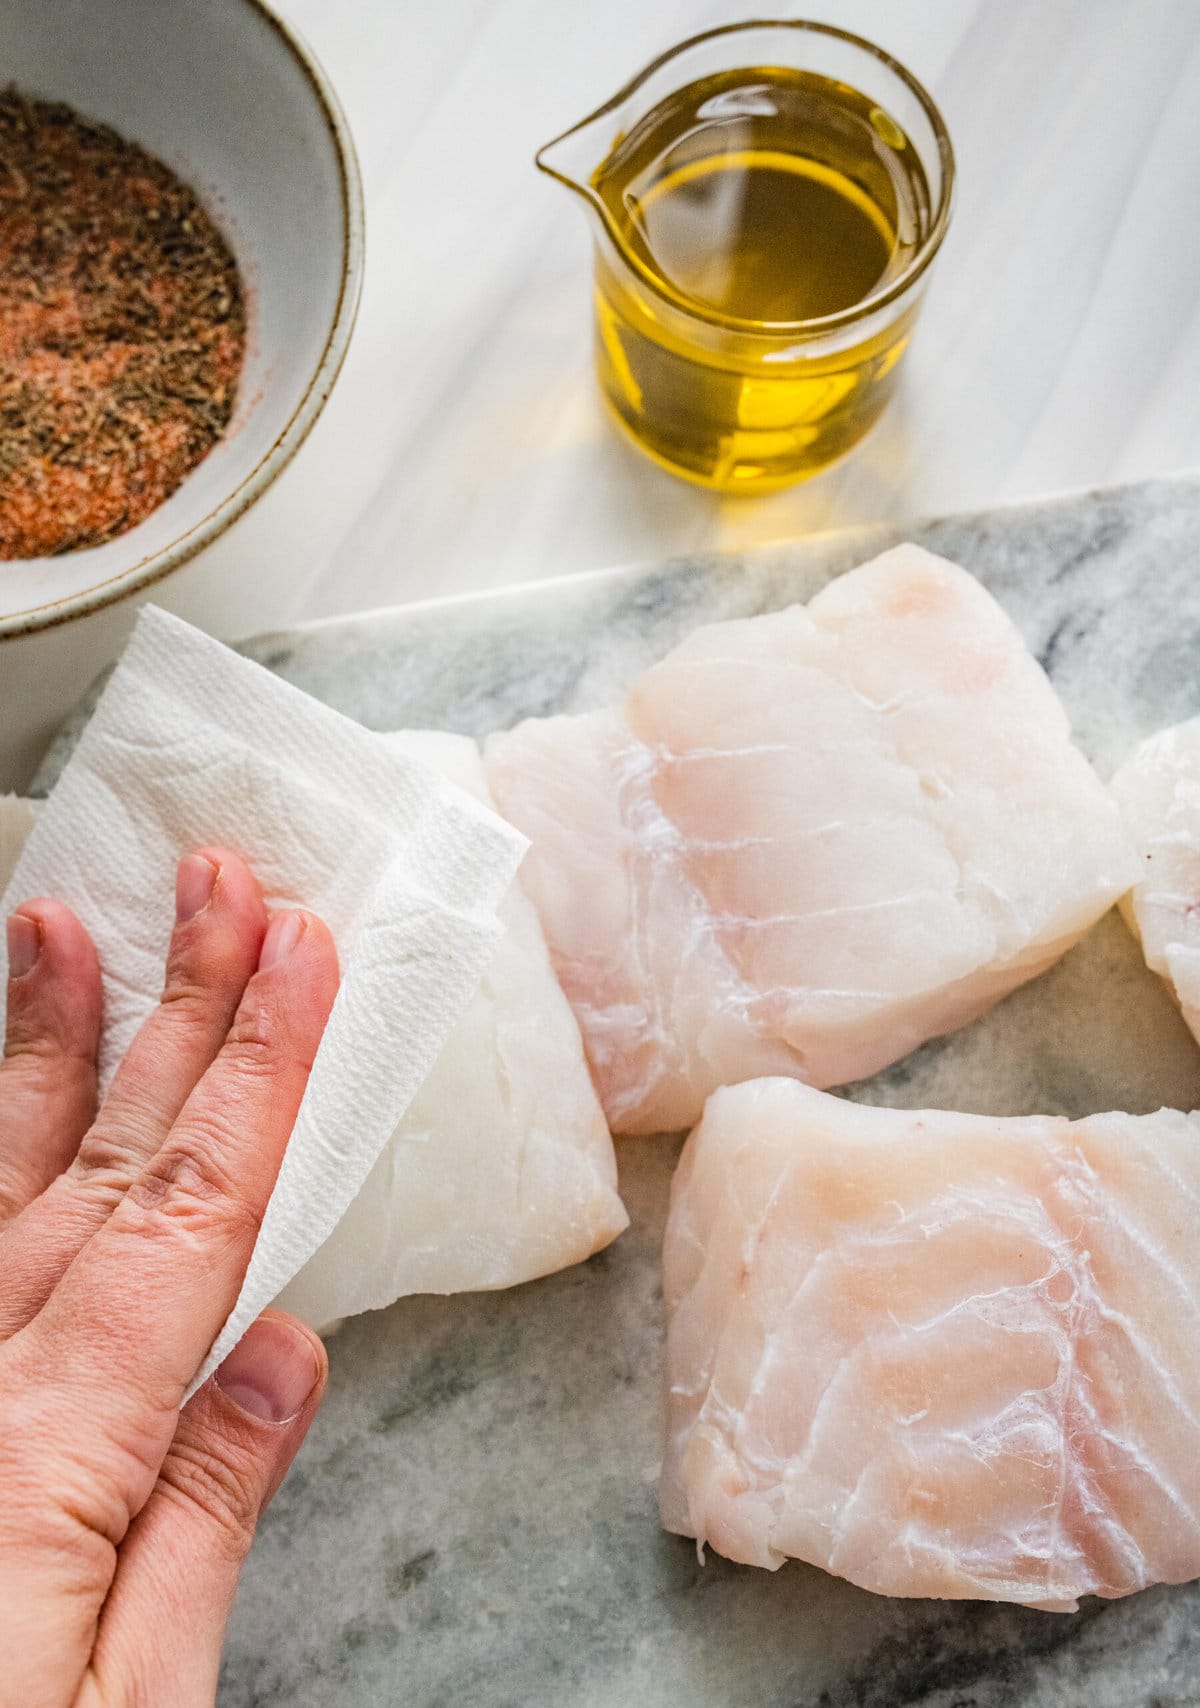 Process for making blackened cod- patting fish dry.